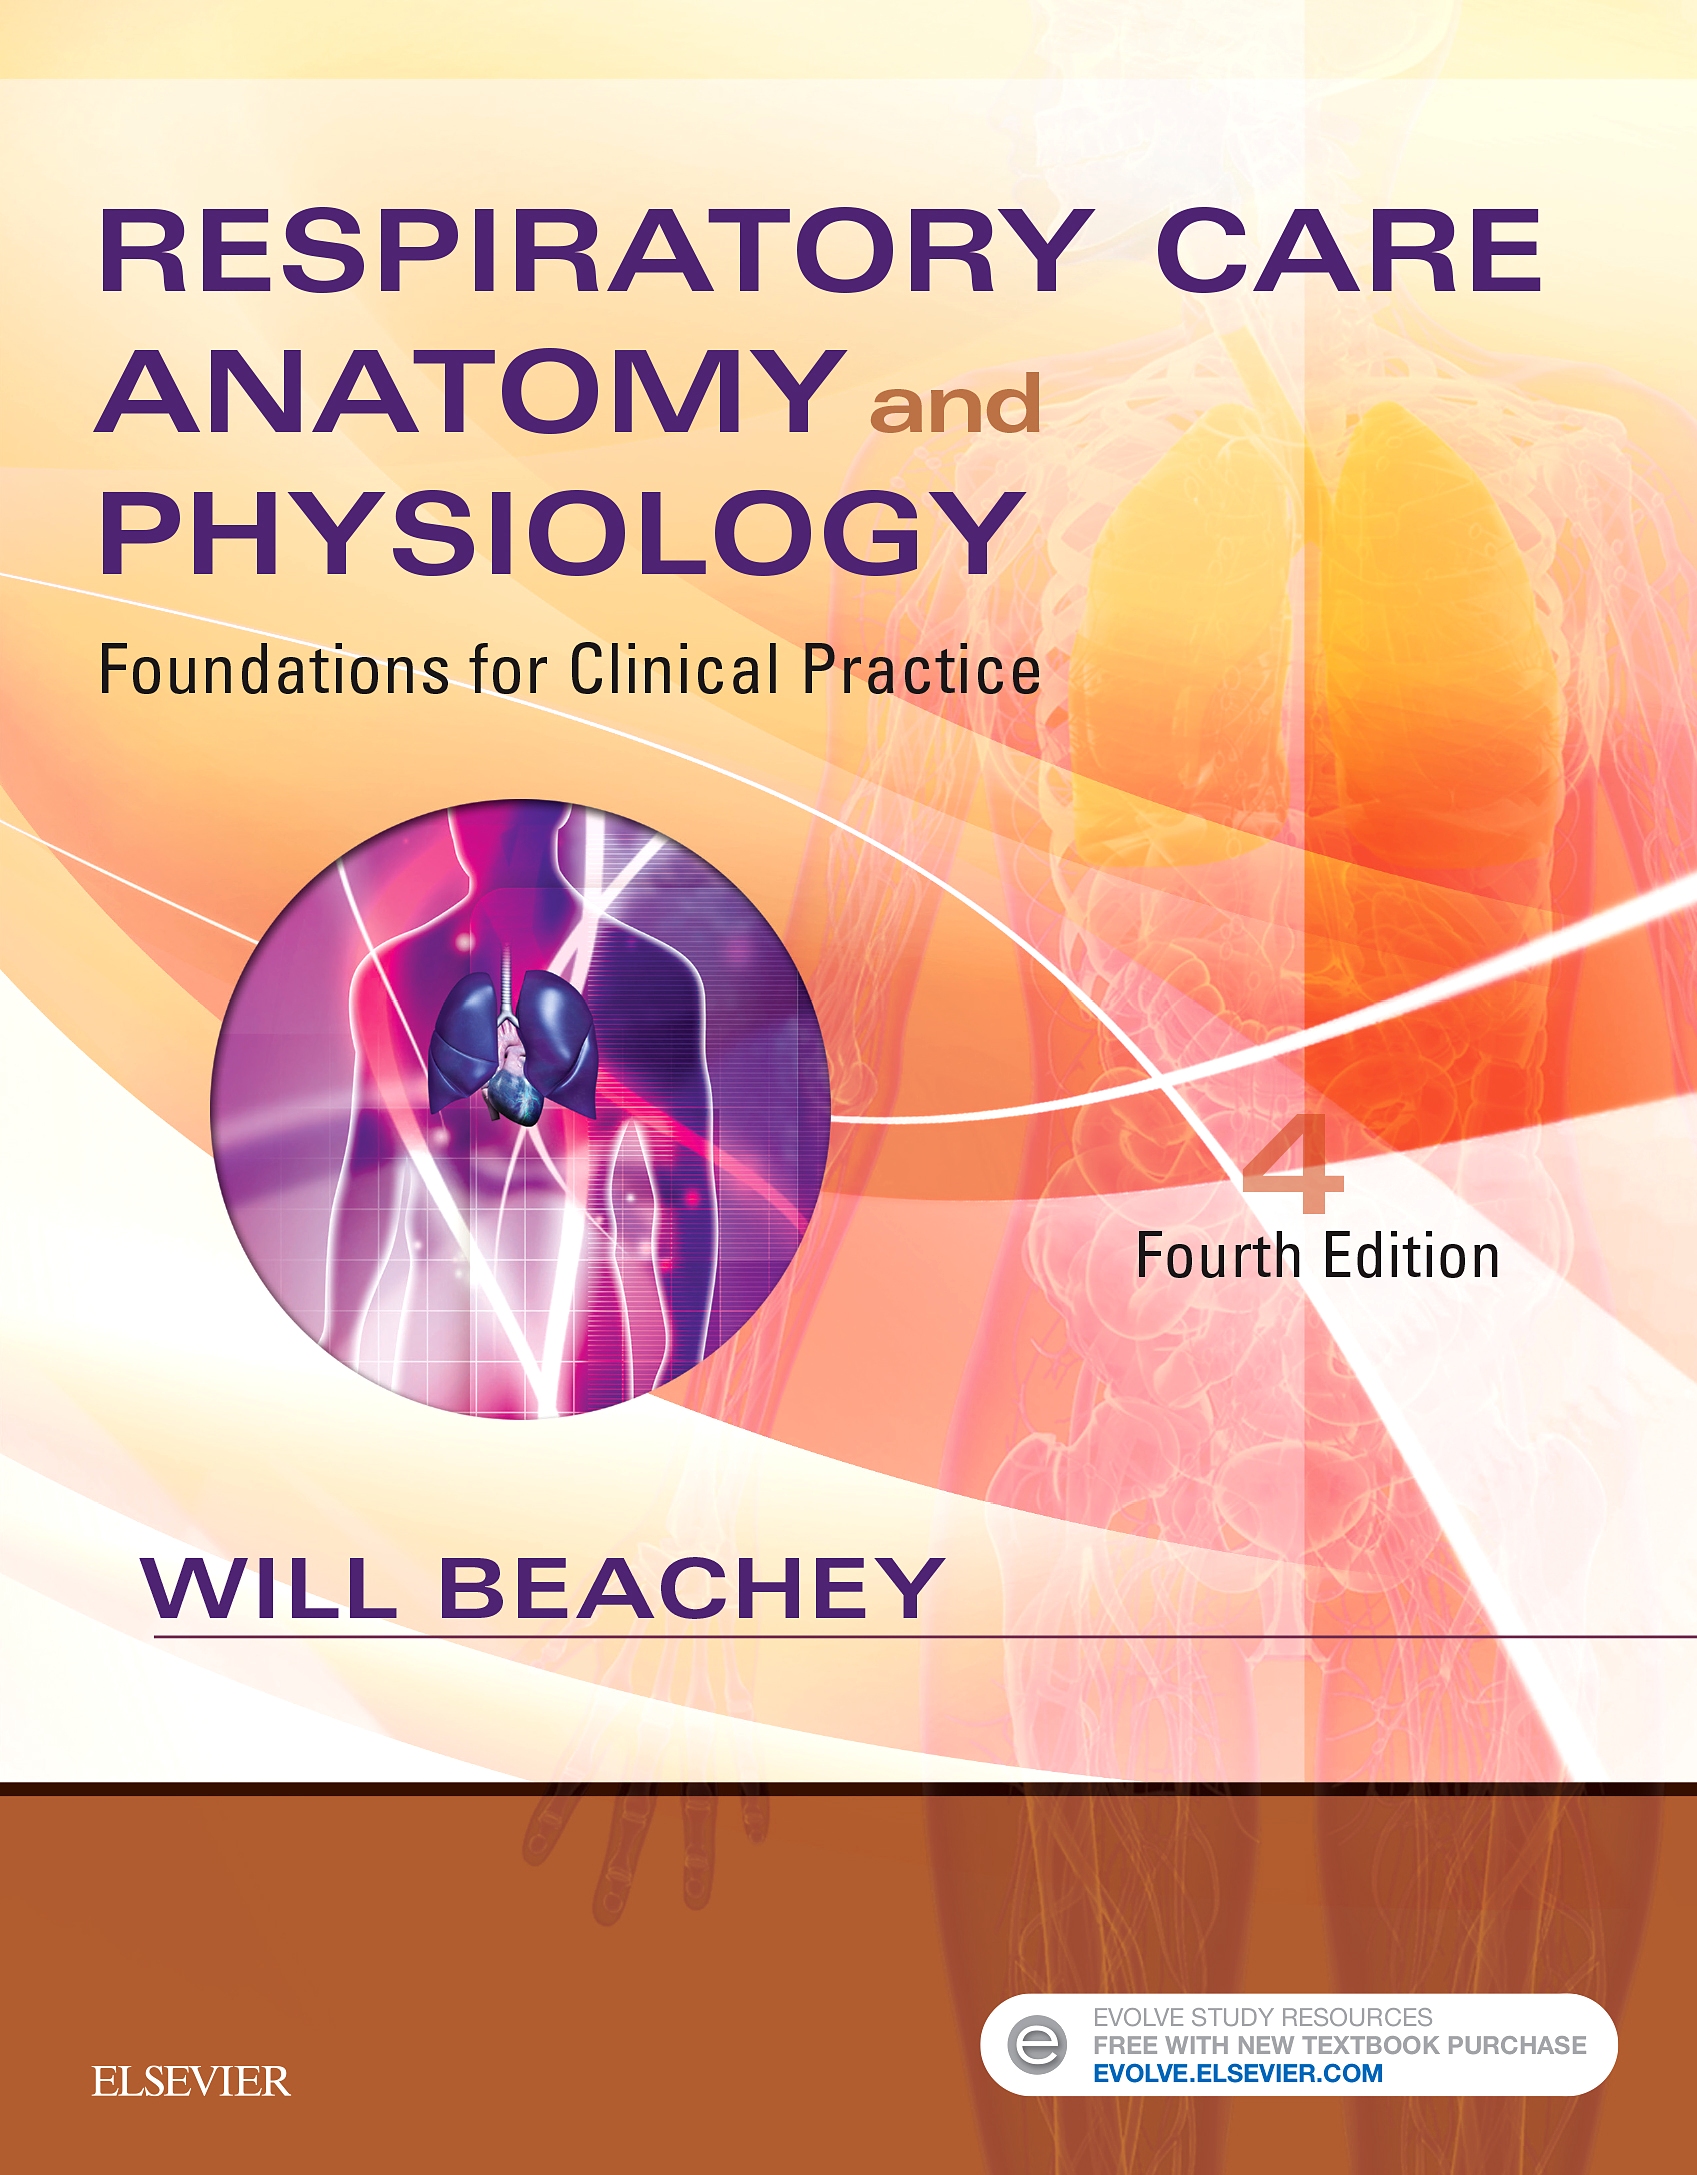 Evolve Resources for Respiratory Care Anatomy and Physiology, 4th Edition